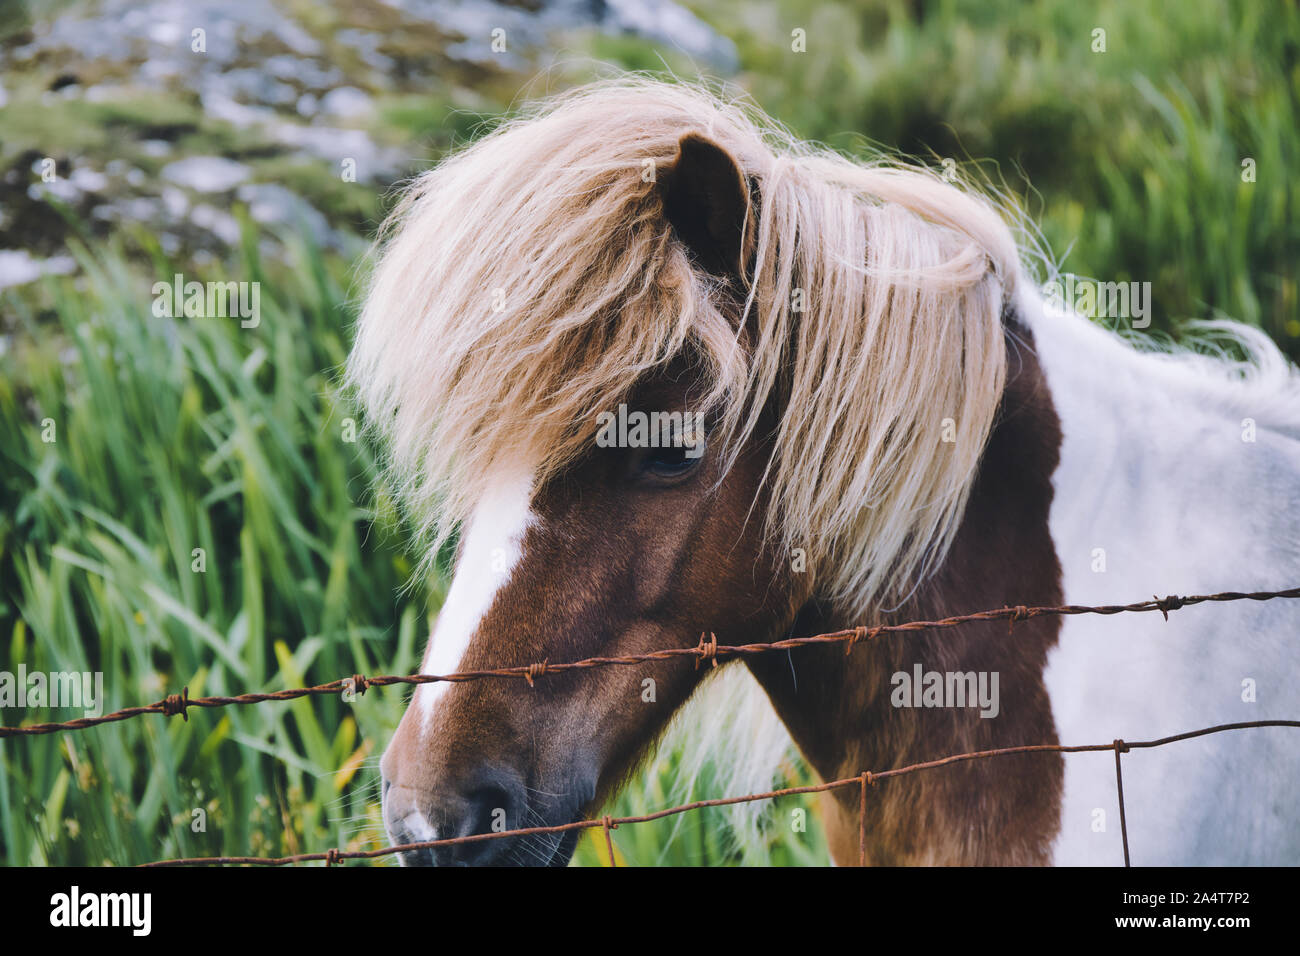 Shetland pony standing next to barbed wire fence, Isle of Harris, Outer Hebrides, Scotland Stock Photo